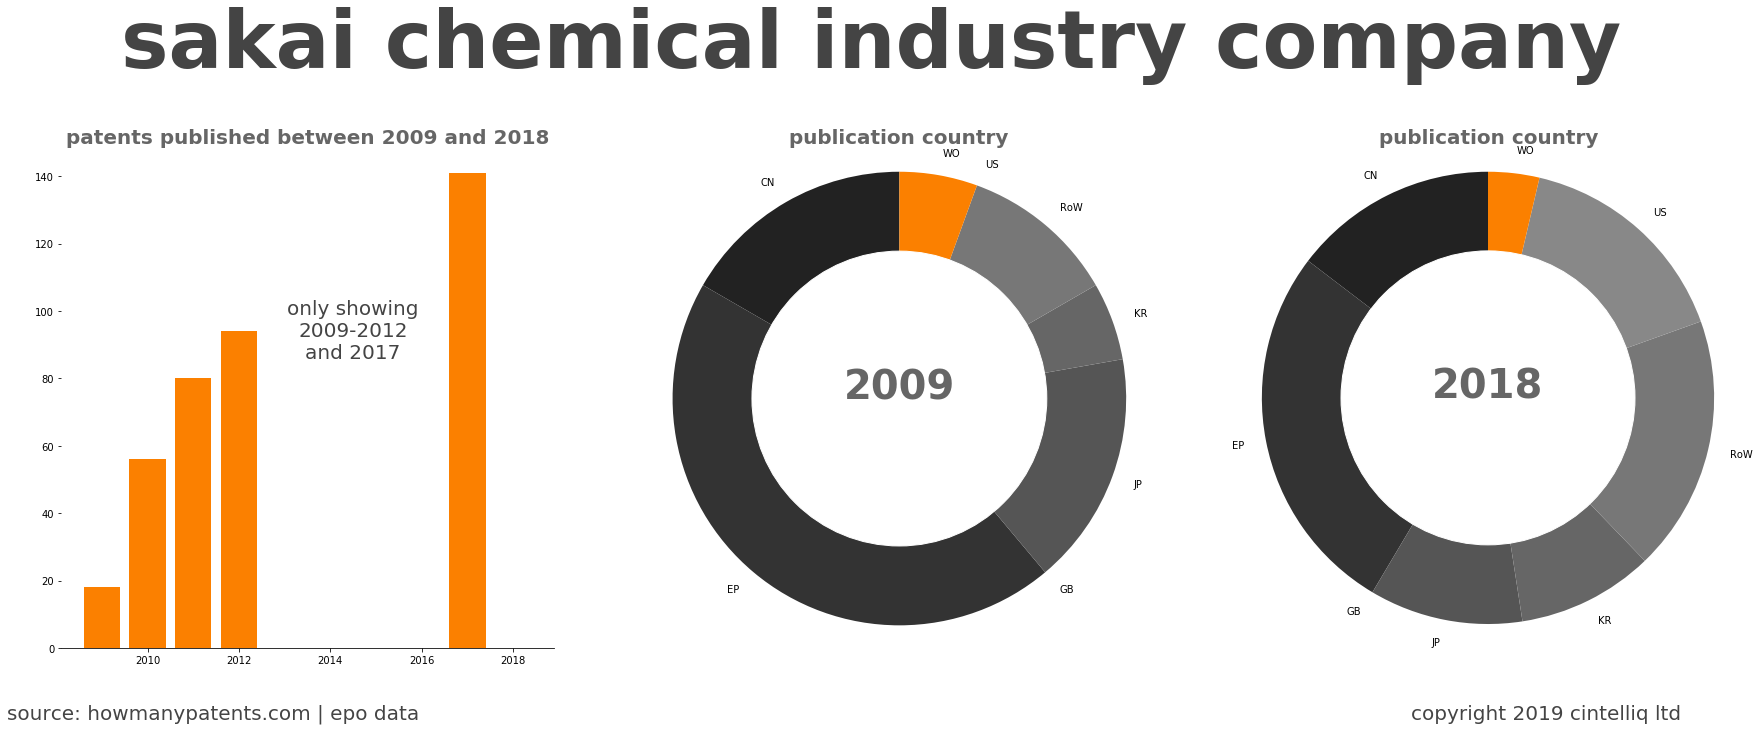 summary of patents for Sakai Chemical Industry Company